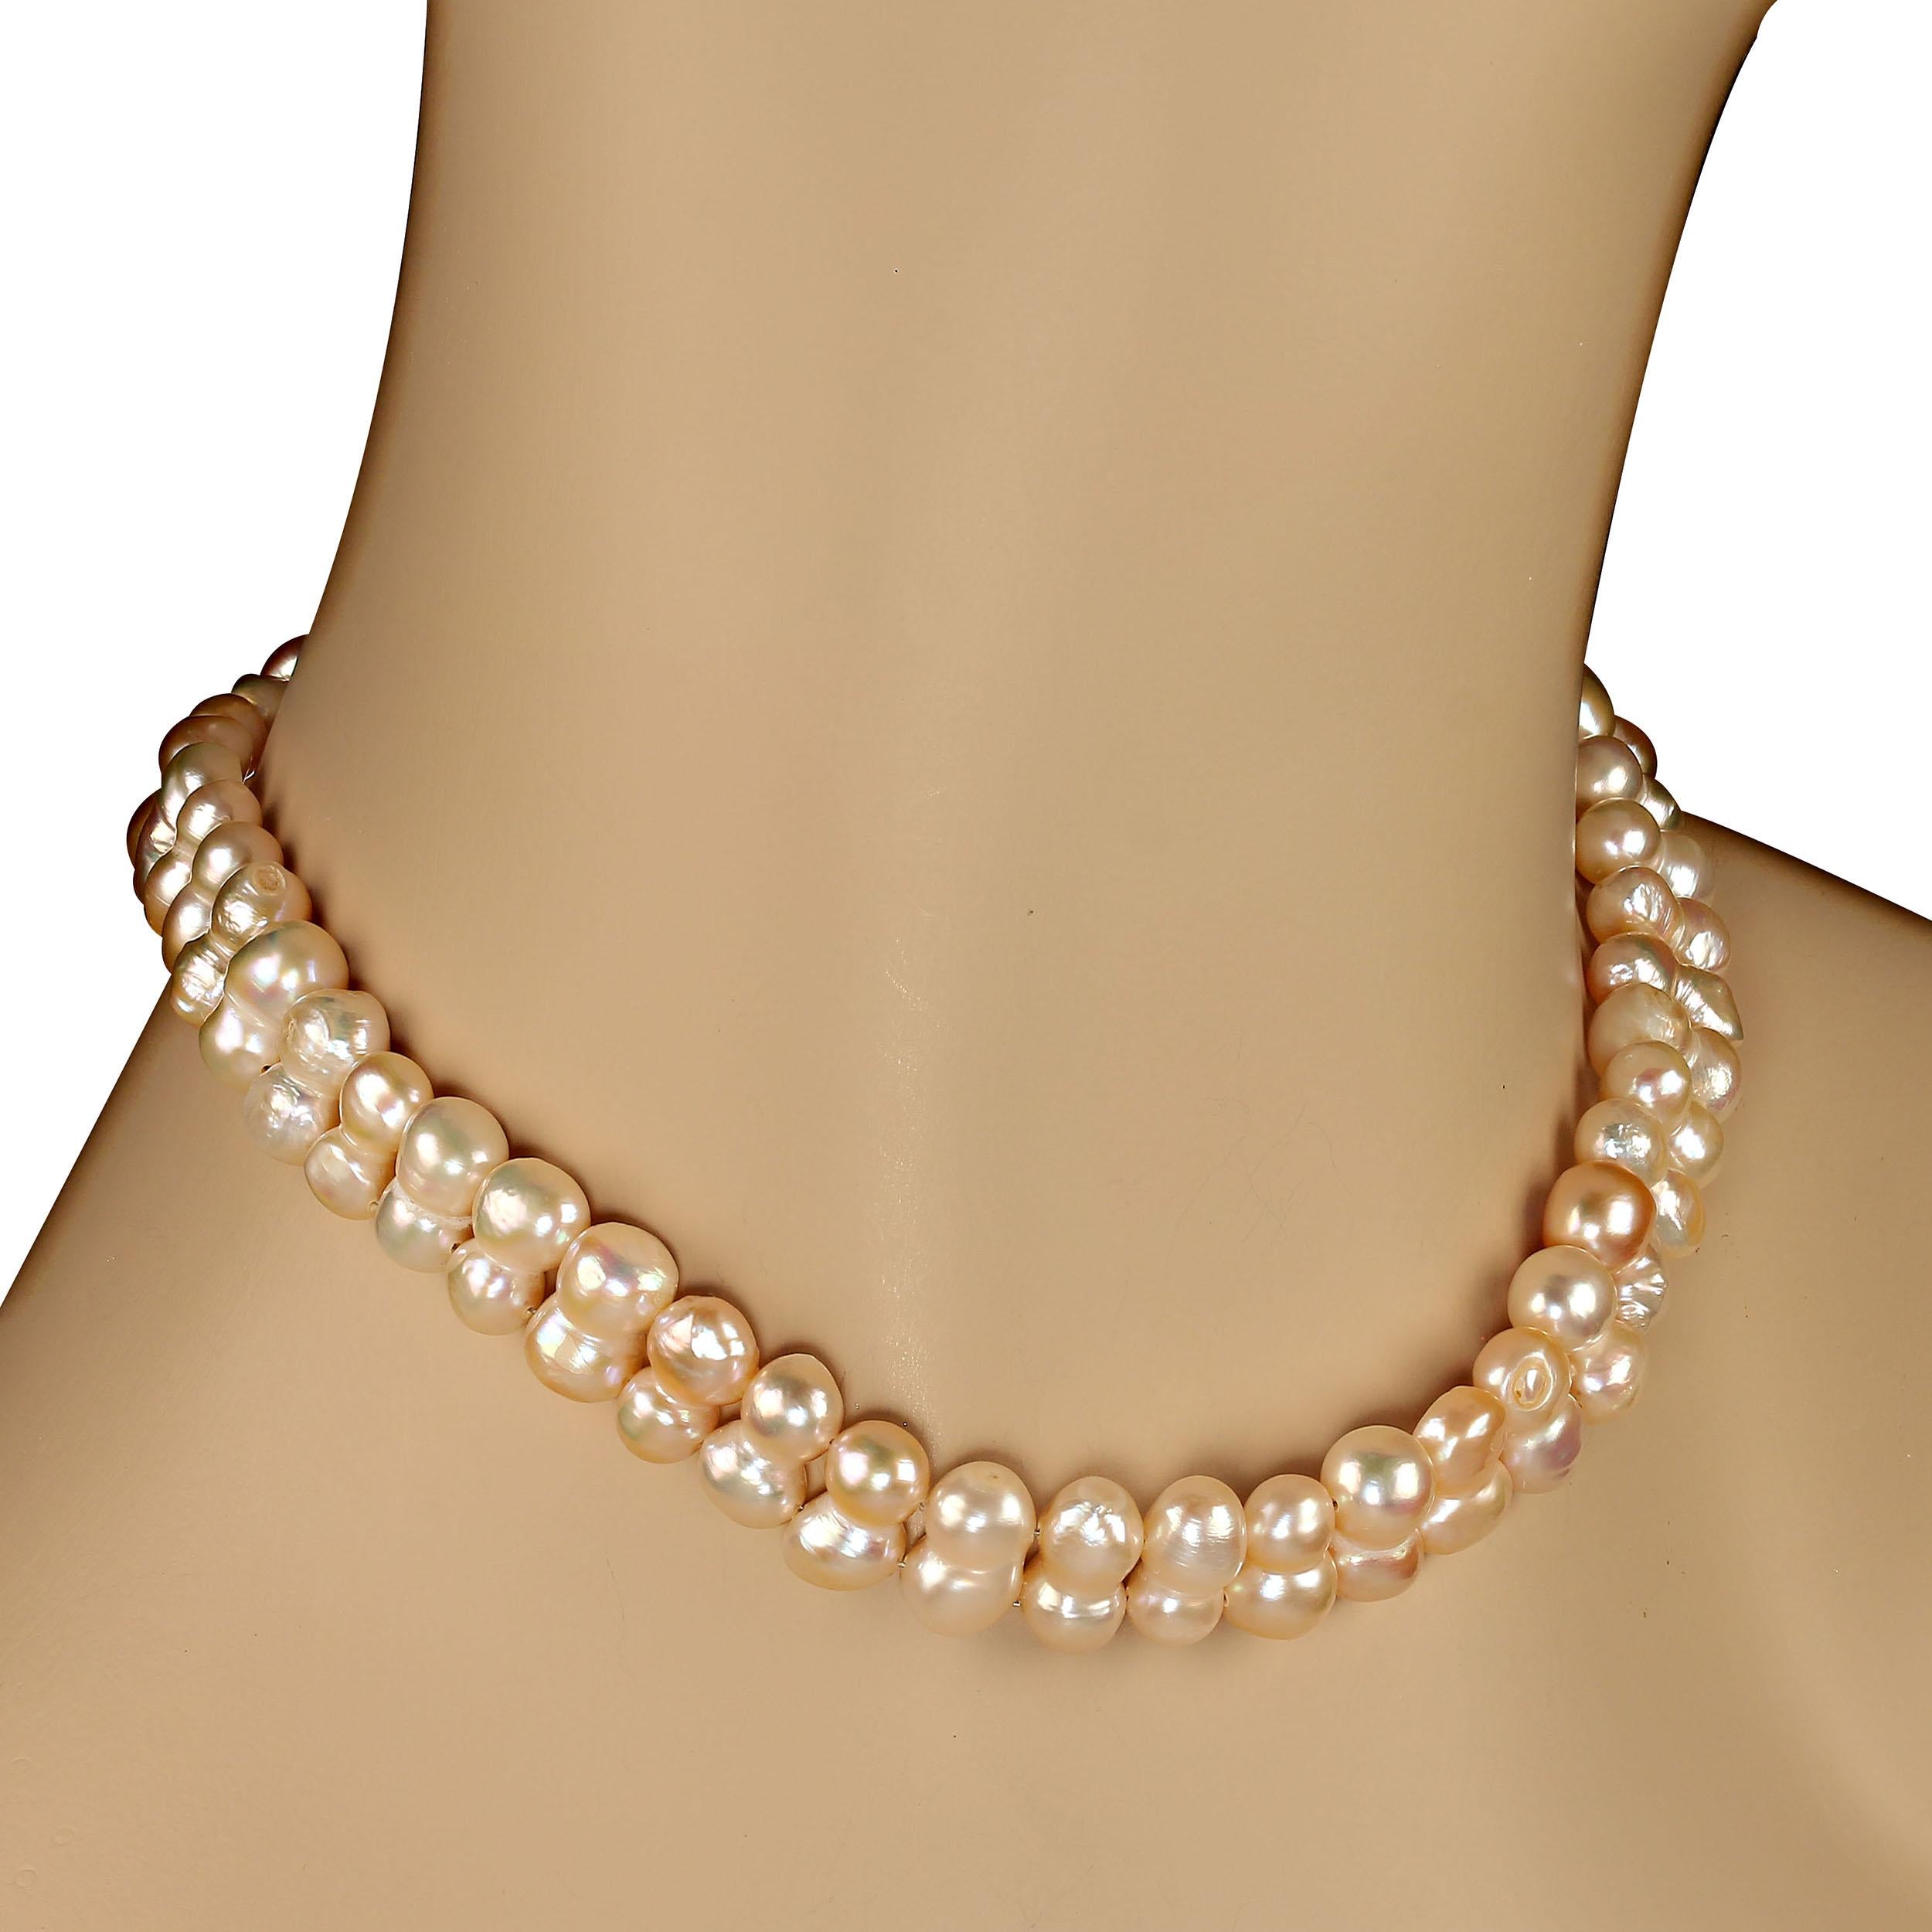 15.5 Inch choker pearl necklace of two strands.  These pearls developed attached so they sit together perfectly for a choker necklace. Wear this 15.5-inch necklace however it fits you best. The pearls are a light pinkish-white and is 13x7mm. It